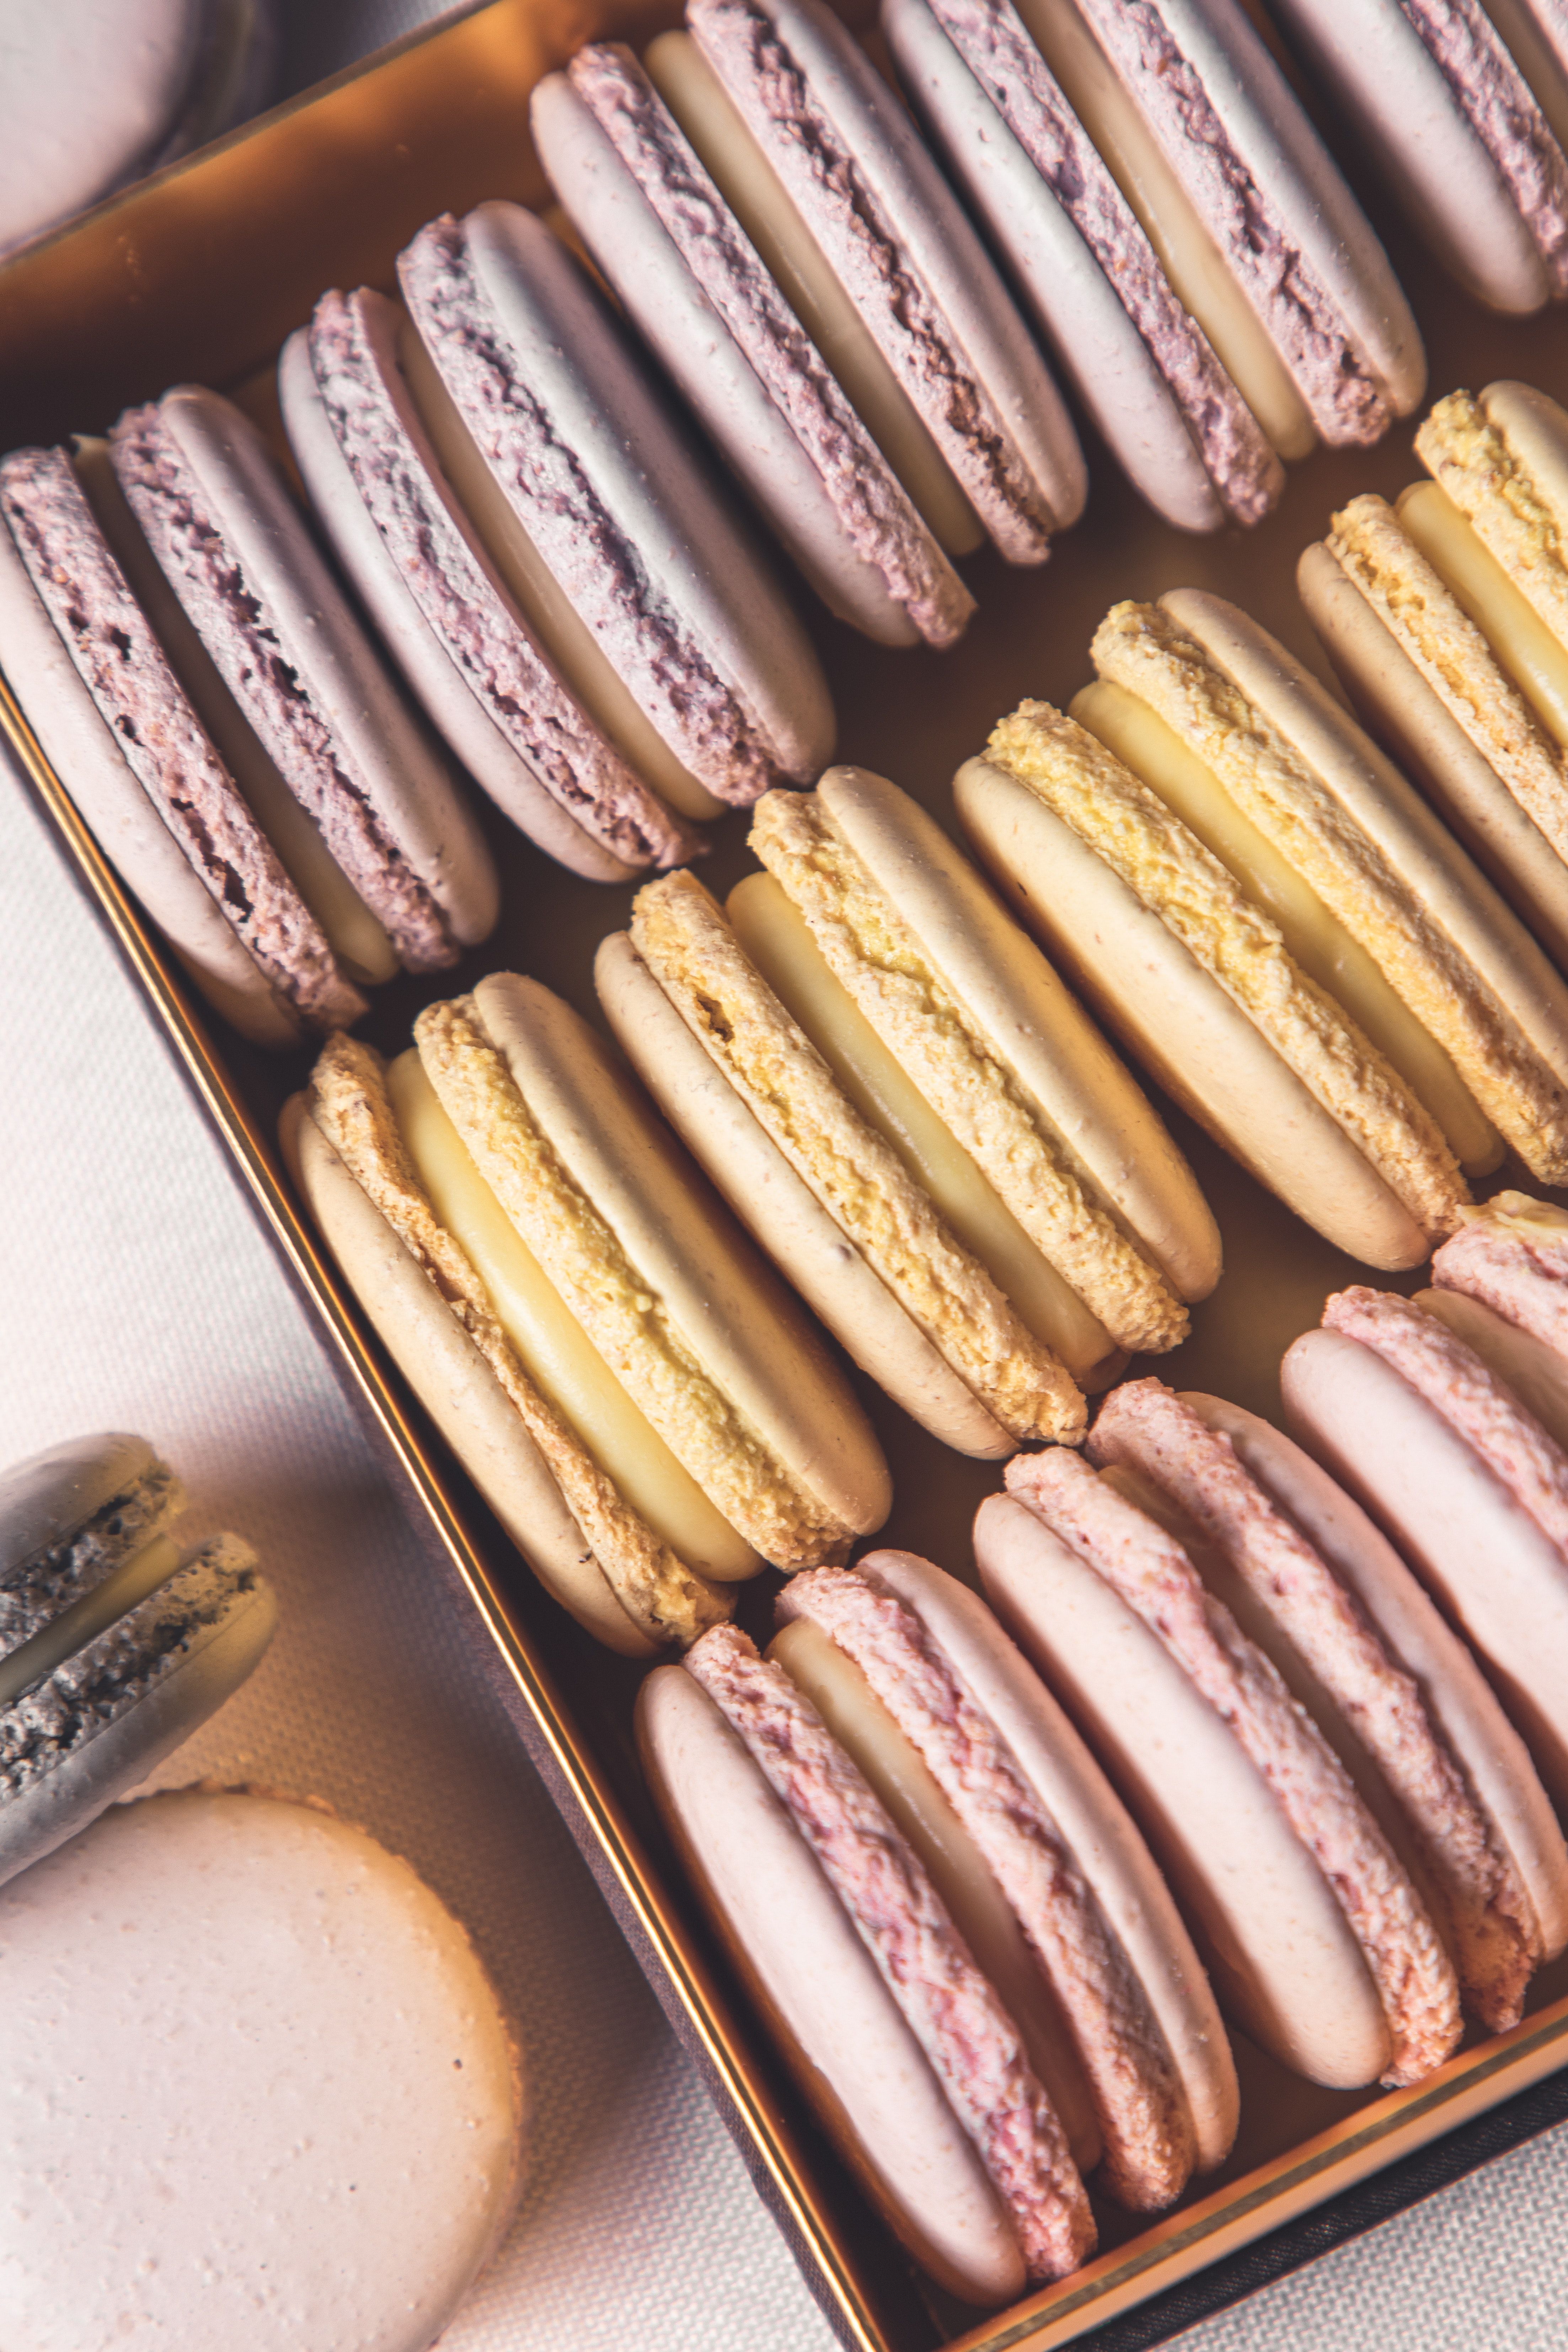 A tray of pastries on top and bottom - Macarons